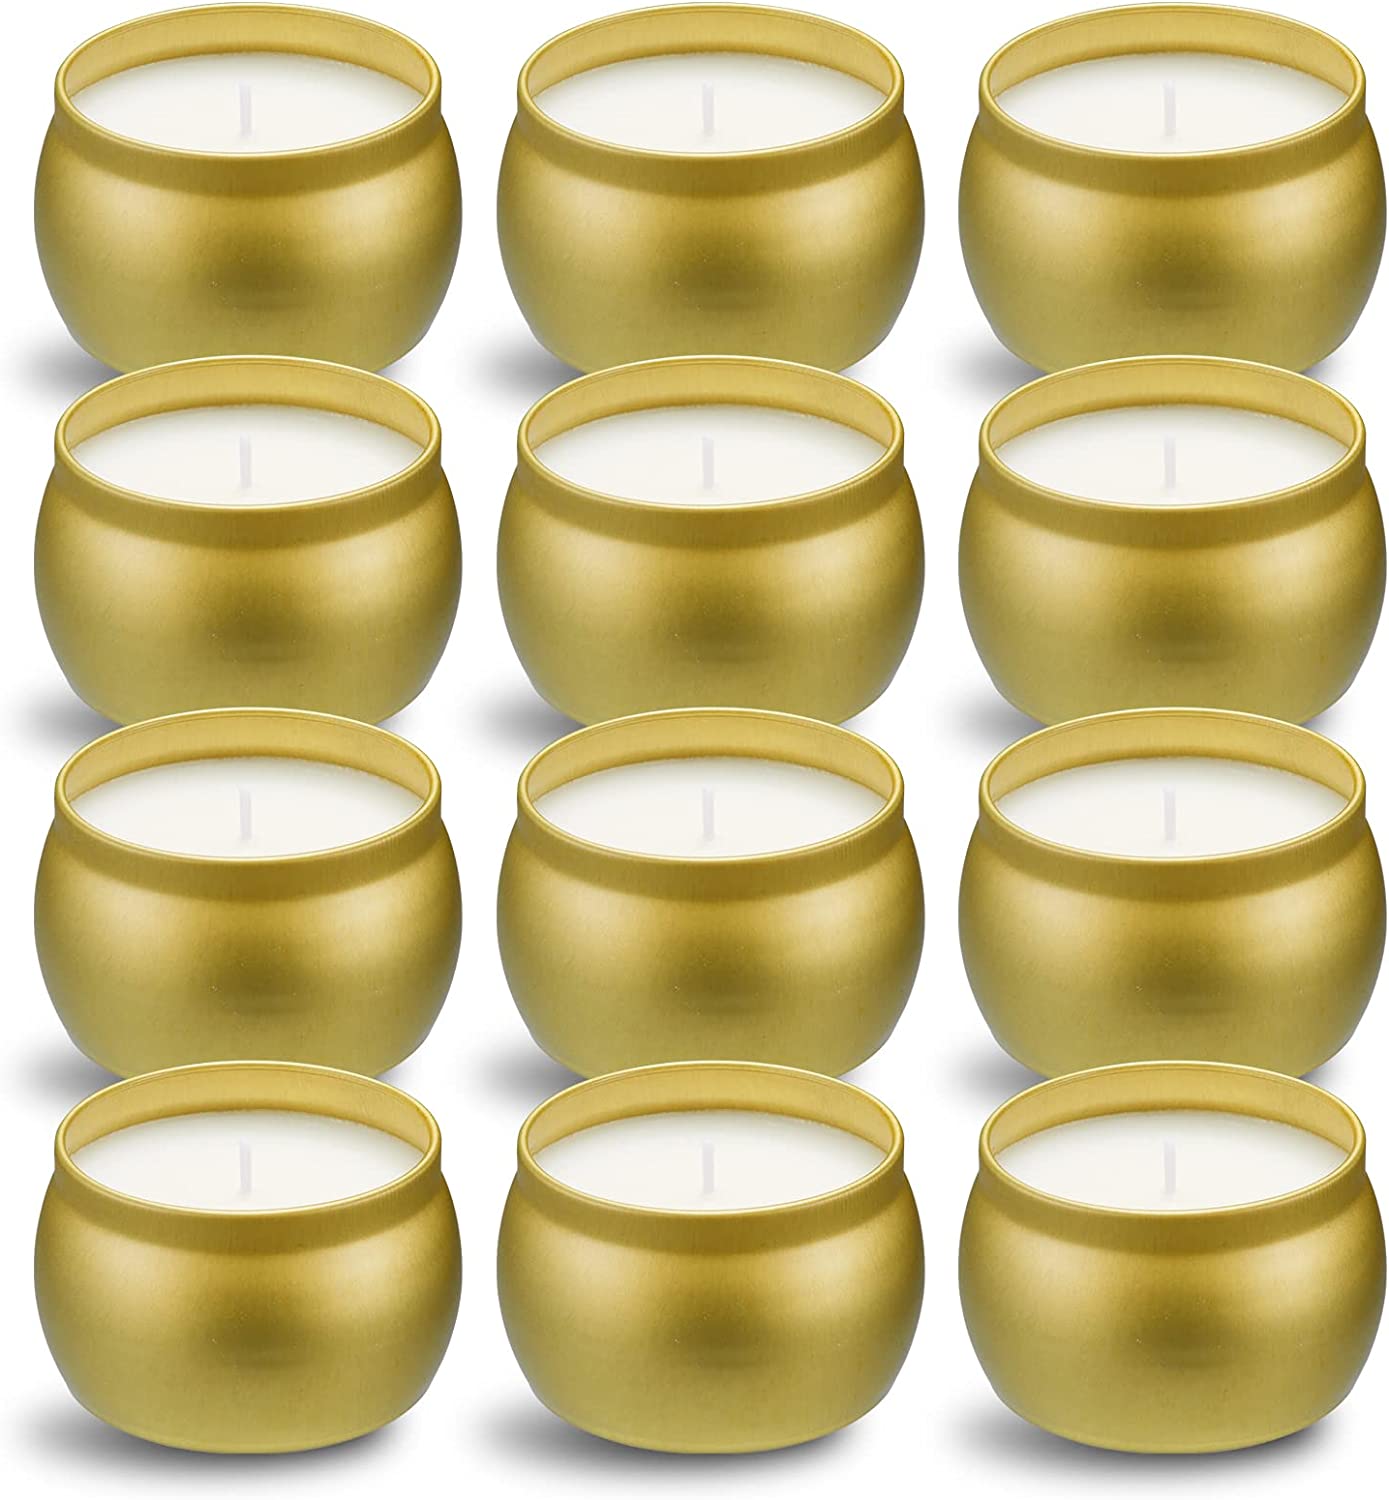 Small Candles For Gifts In Bulk WholeSale - Price List, Bulk Buy